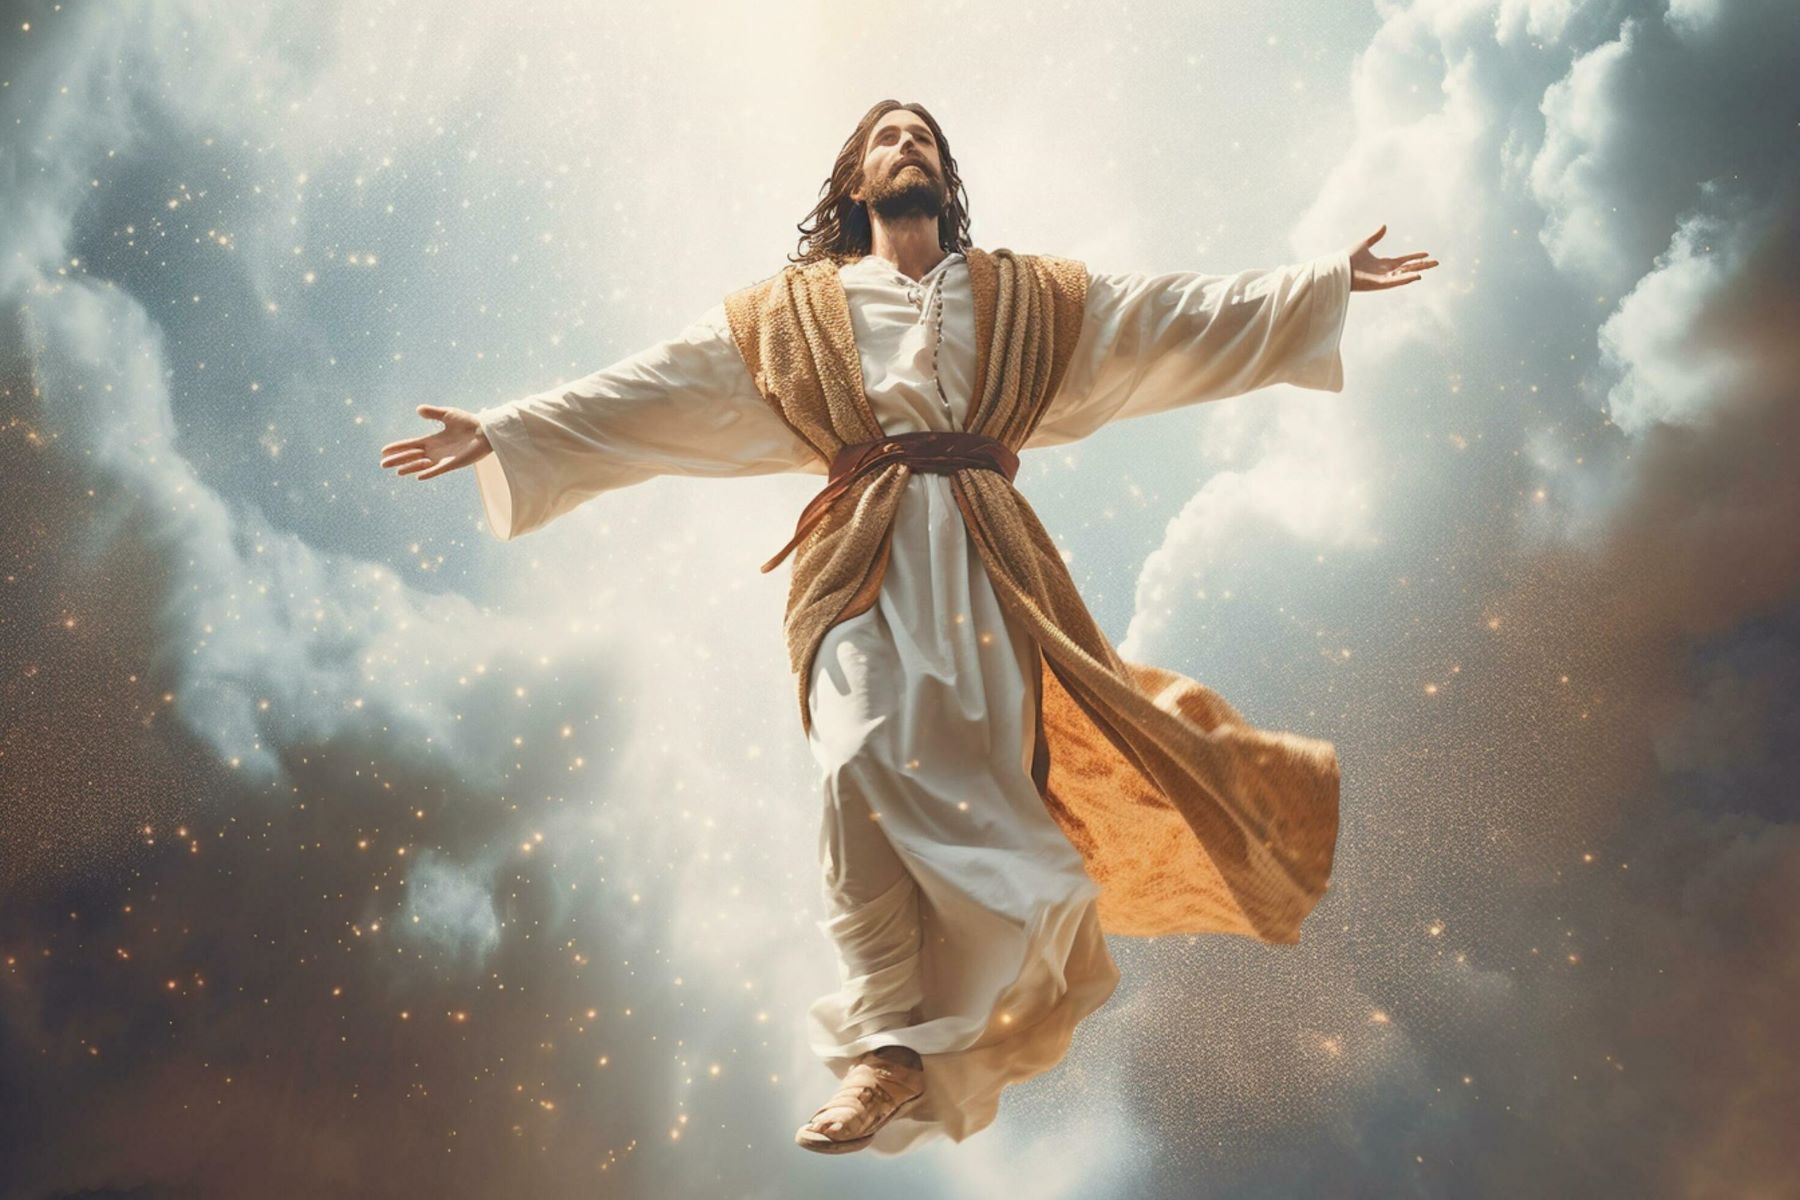 The Incredible Dream: Jesus’ Embrace Transforms Everything